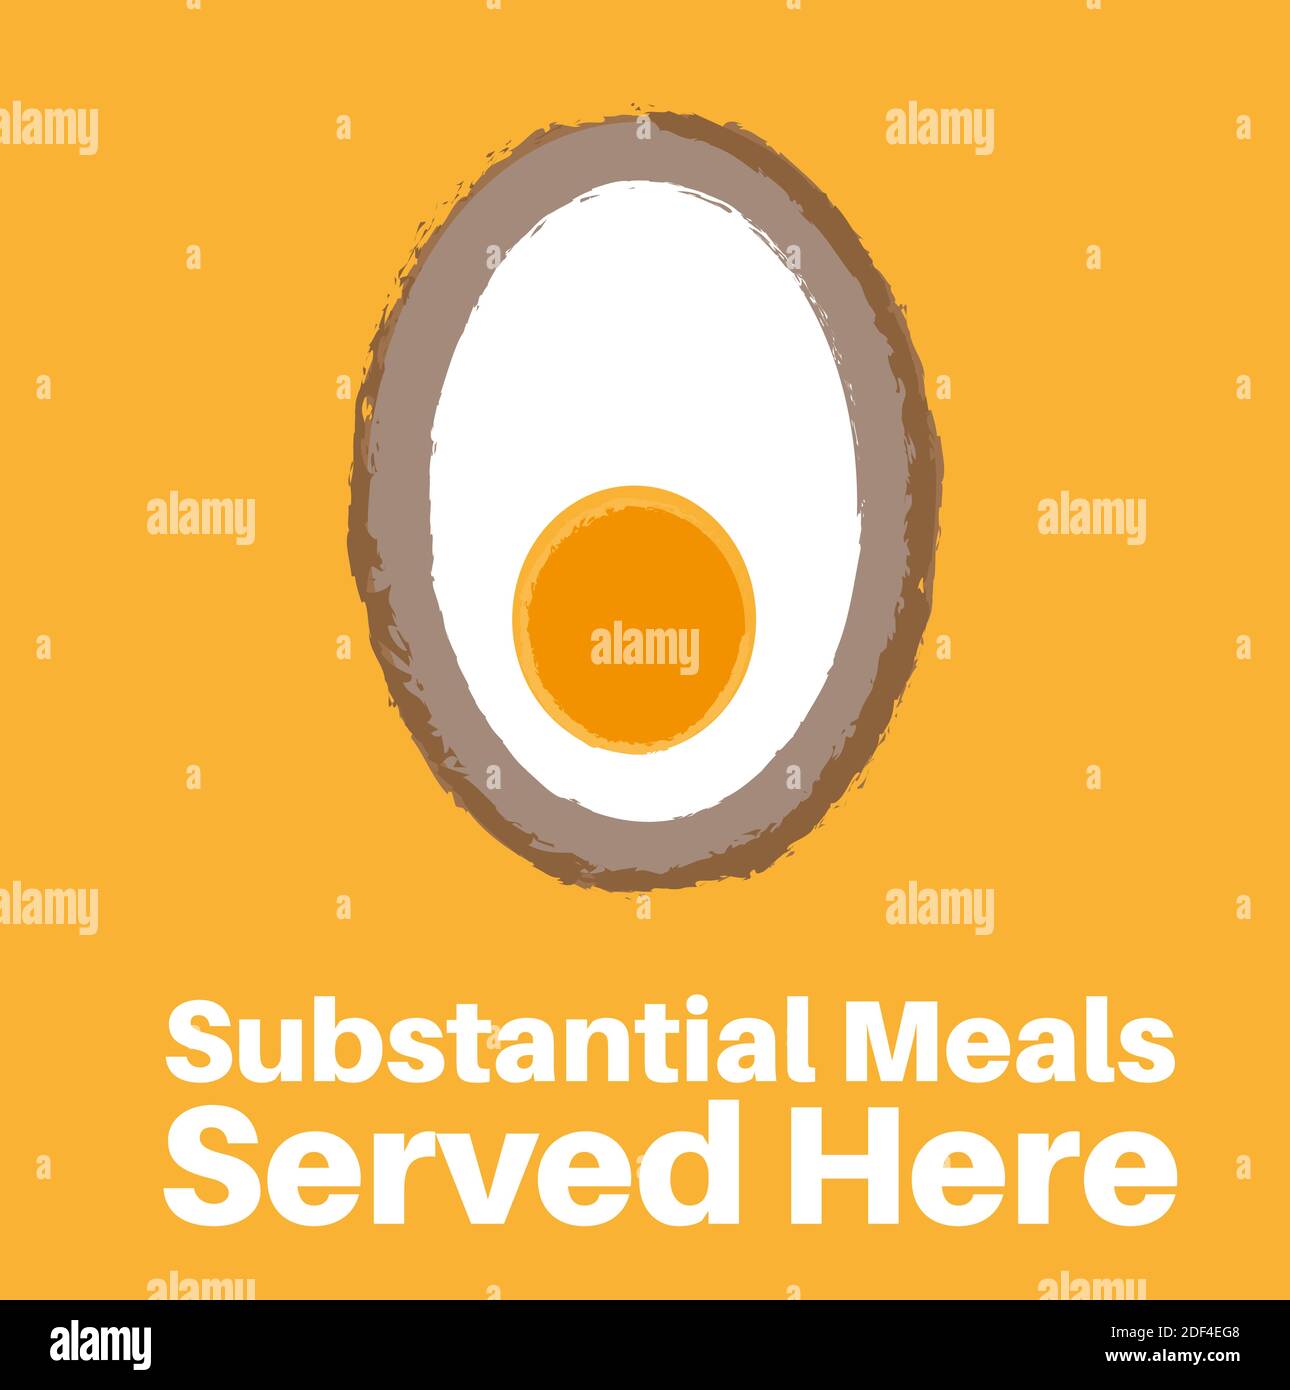 Scotch Eggs served here vector illustration on a yellow background Stock Vector